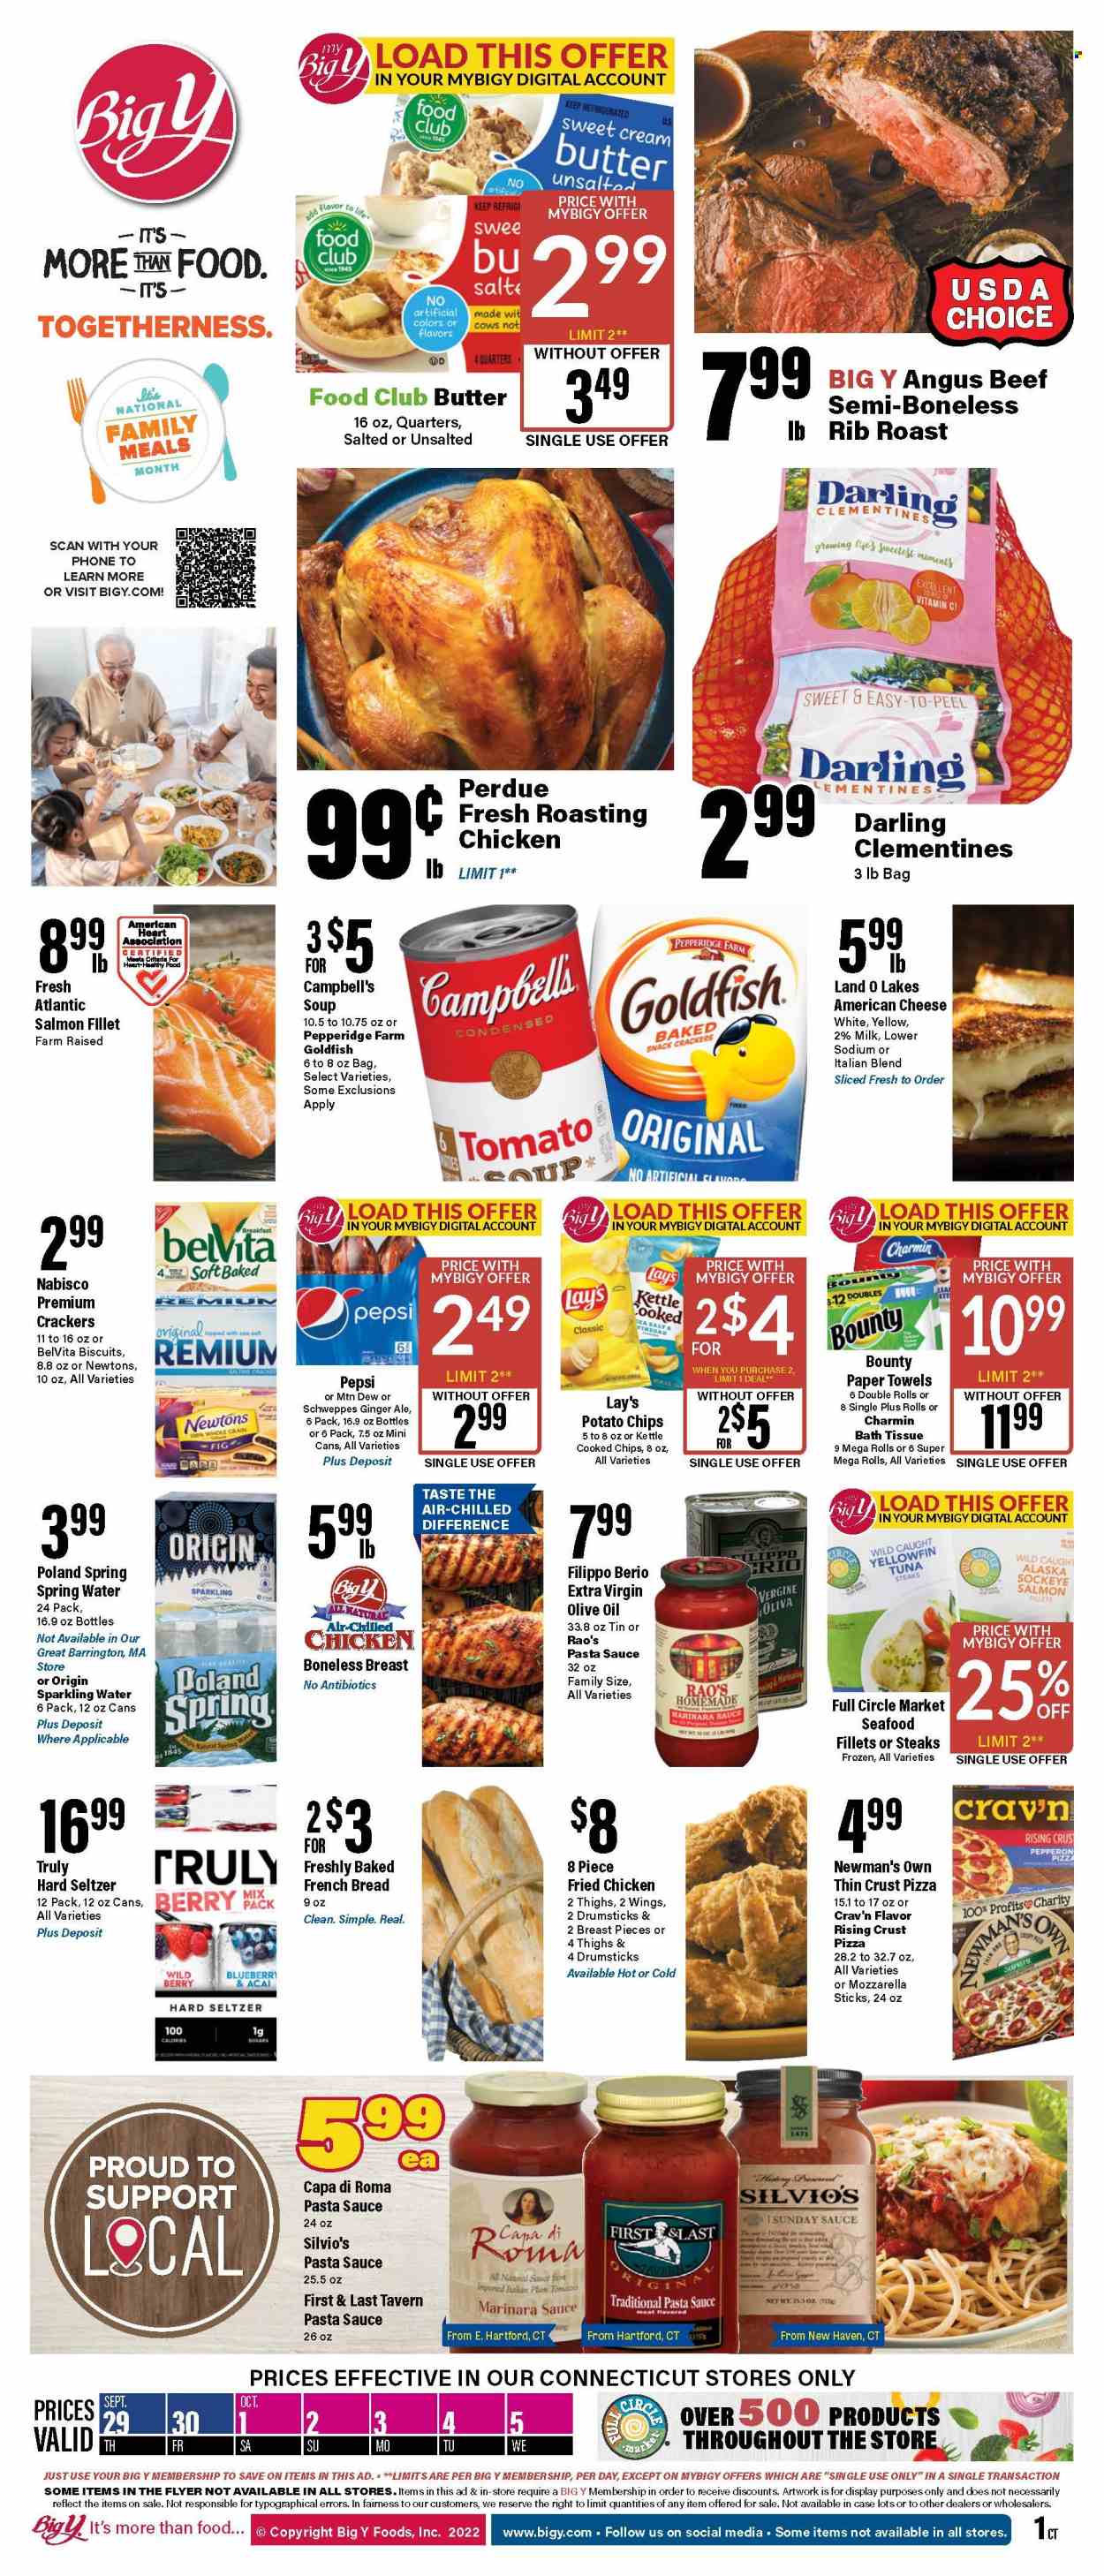 thumbnail - Big Y Flyer - 09/29/2022 - 10/05/2022 - Sales products - bread, french bread, salmon, salmon fillet, tuna, seafood, Campbell's, pizza, chicken roast, pasta sauce, soup, sauce, fried chicken, Perdue®, american cheese, milk, butter, snack, Bounty, crackers, biscuit, potato chips, Lay’s, Goldfish, saltines, belVita, extra virgin olive oil, olive oil, oil, ginger ale, Mountain Dew, Schweppes, Pepsi, spring water, sparkling water, tea, Hard Seltzer, TRULY, beef meat, steak, vitamin c, clementines. Page 1.